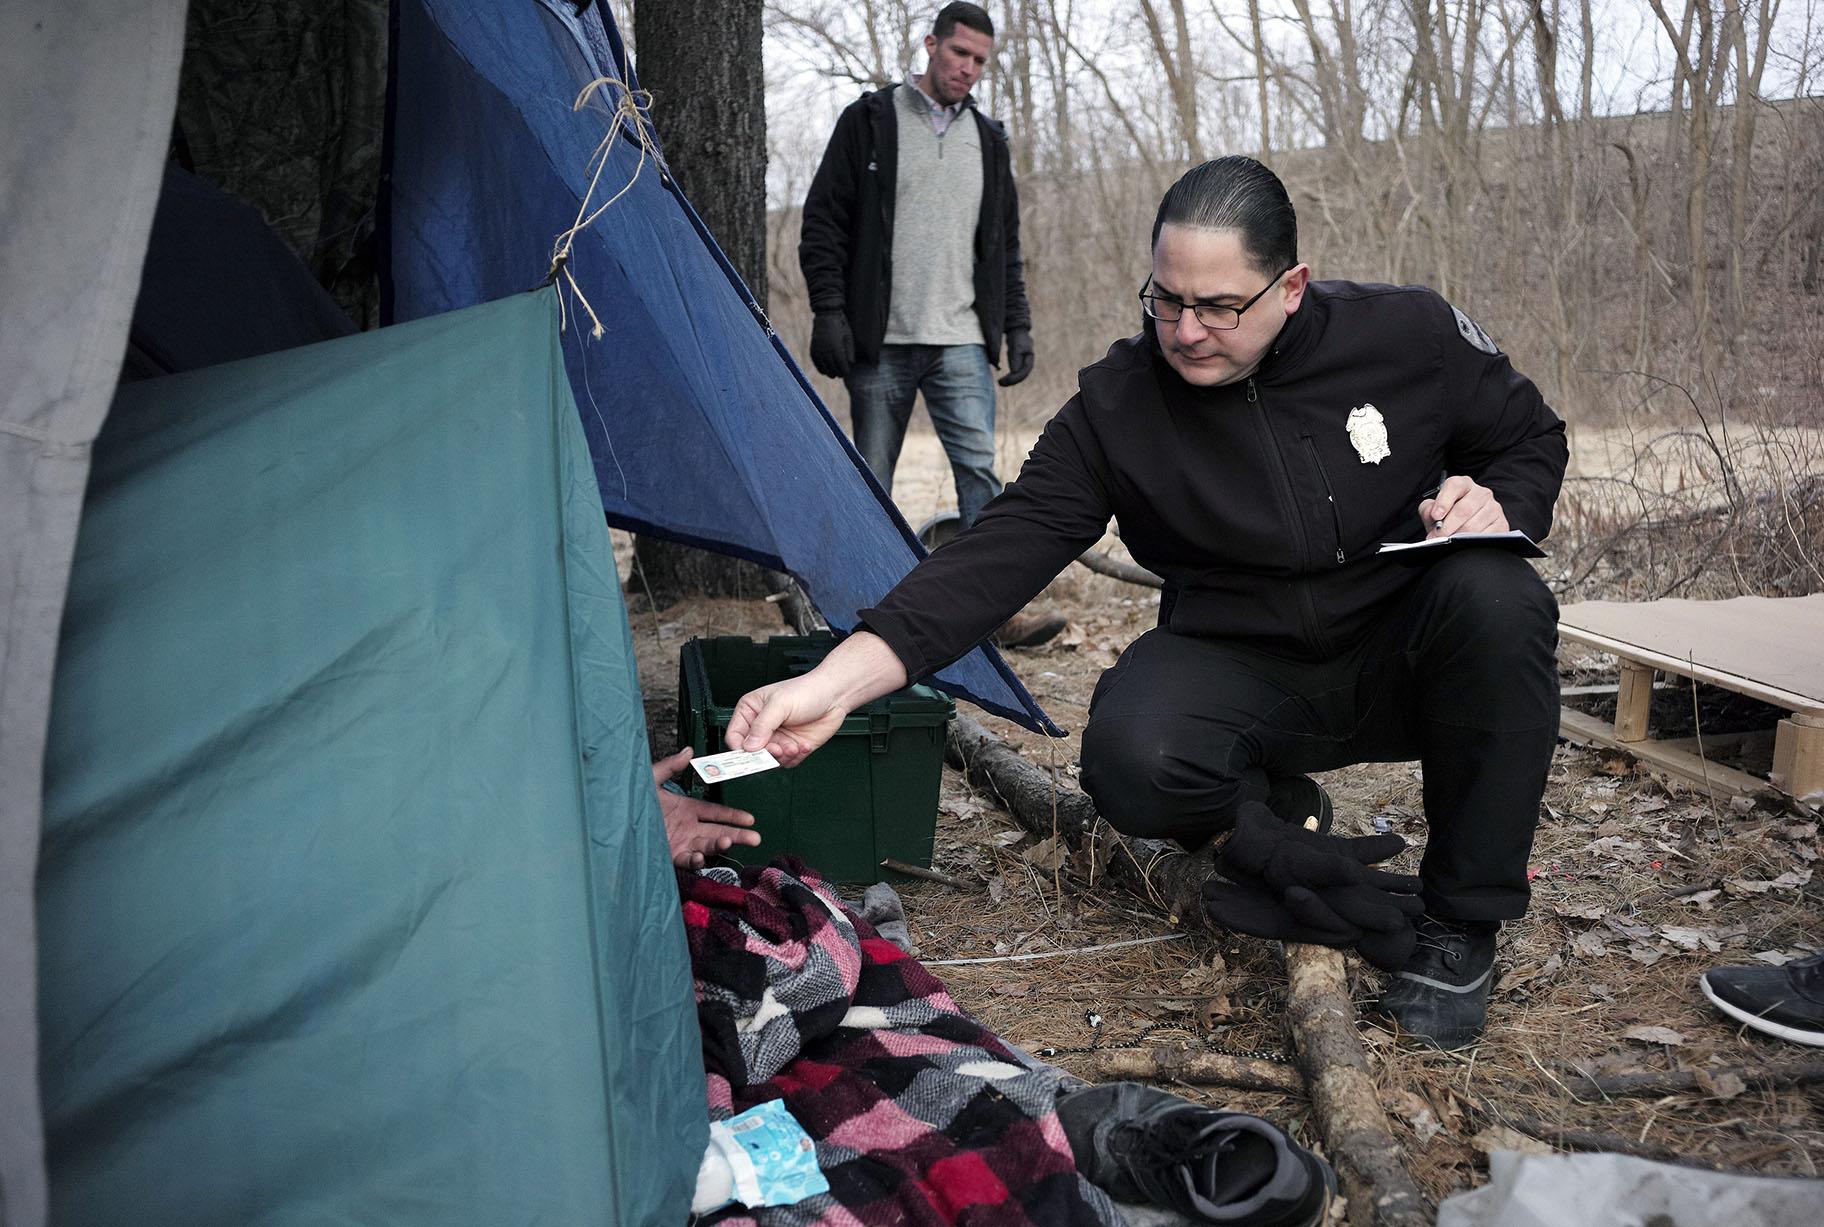 In this Tuesday, Feb. 12, 2019 file photo, Worcester Police Officer Angel Rivera, right, returns a license to an unidentified man as Rivera asks if he has been tested for Hepatitis A at the entrance to a tent where the man spent the night in a wooded area, in Worcester, Mass. (AP Photo / Steven Senne)